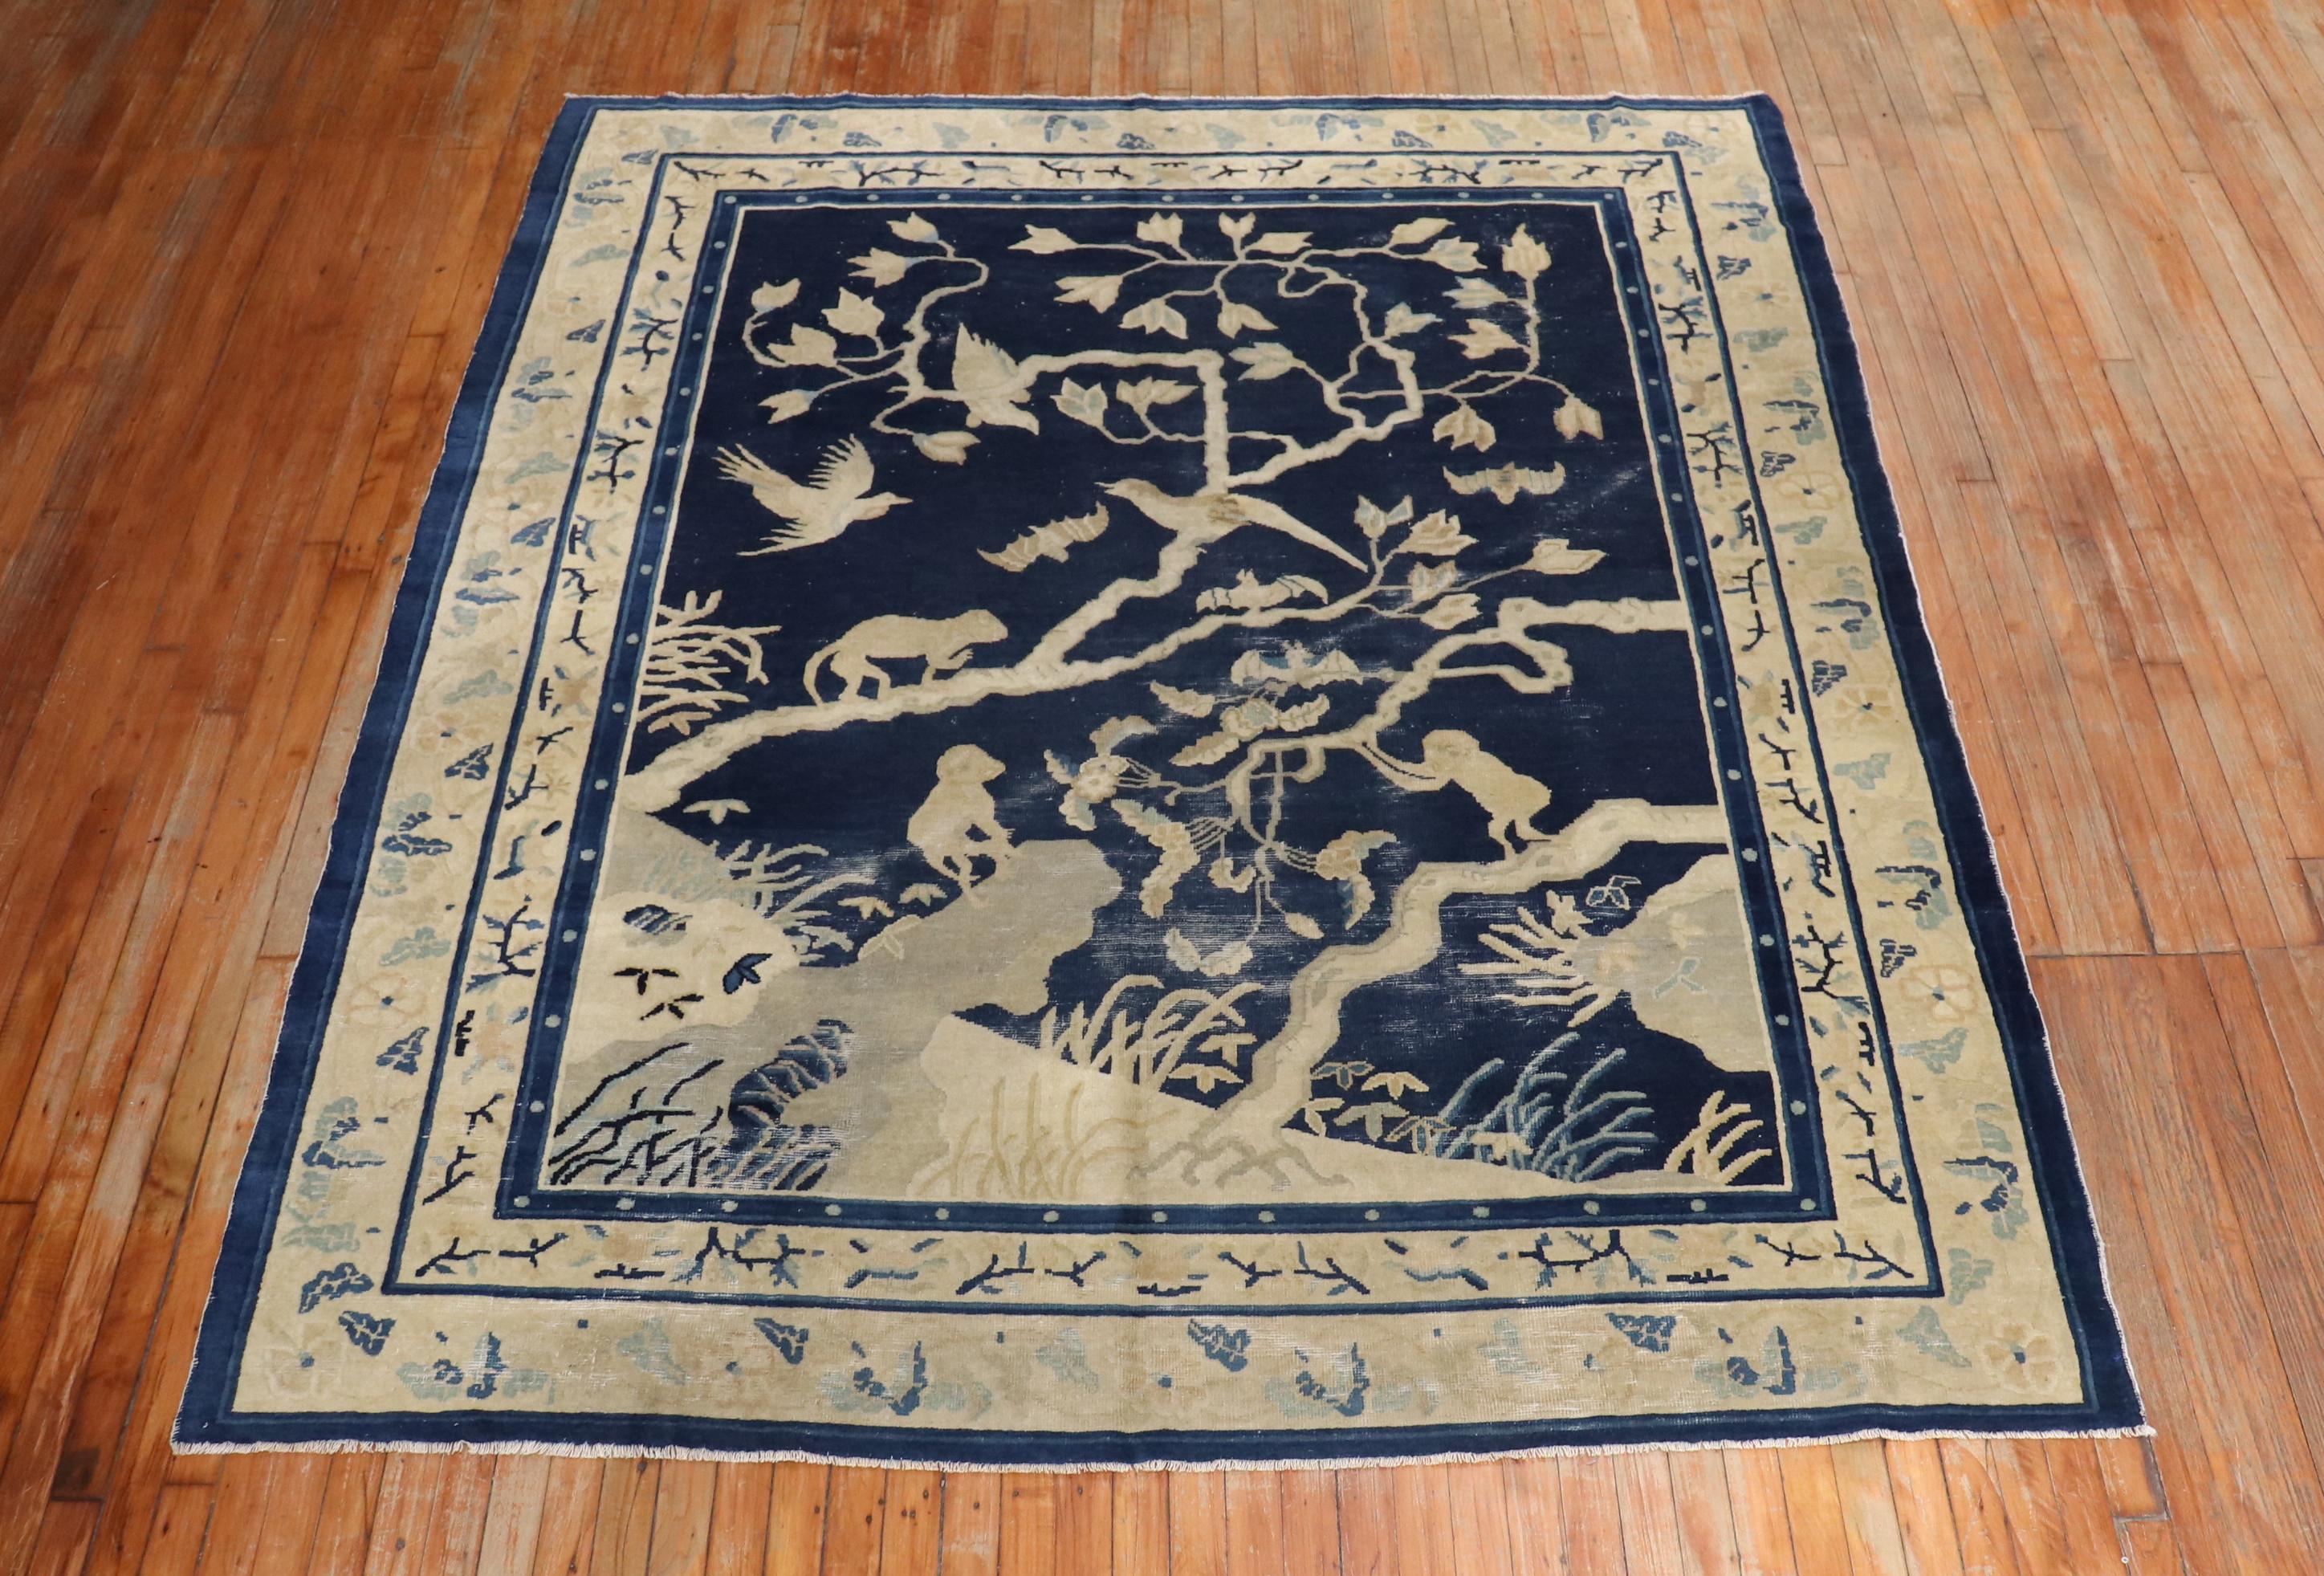 A late 19th century Chinese rug featuring 3 monkeys and some birds on a landscape scene. Navy field, beige accent colors. Some age-related wear

Measures: 7' x 8'6